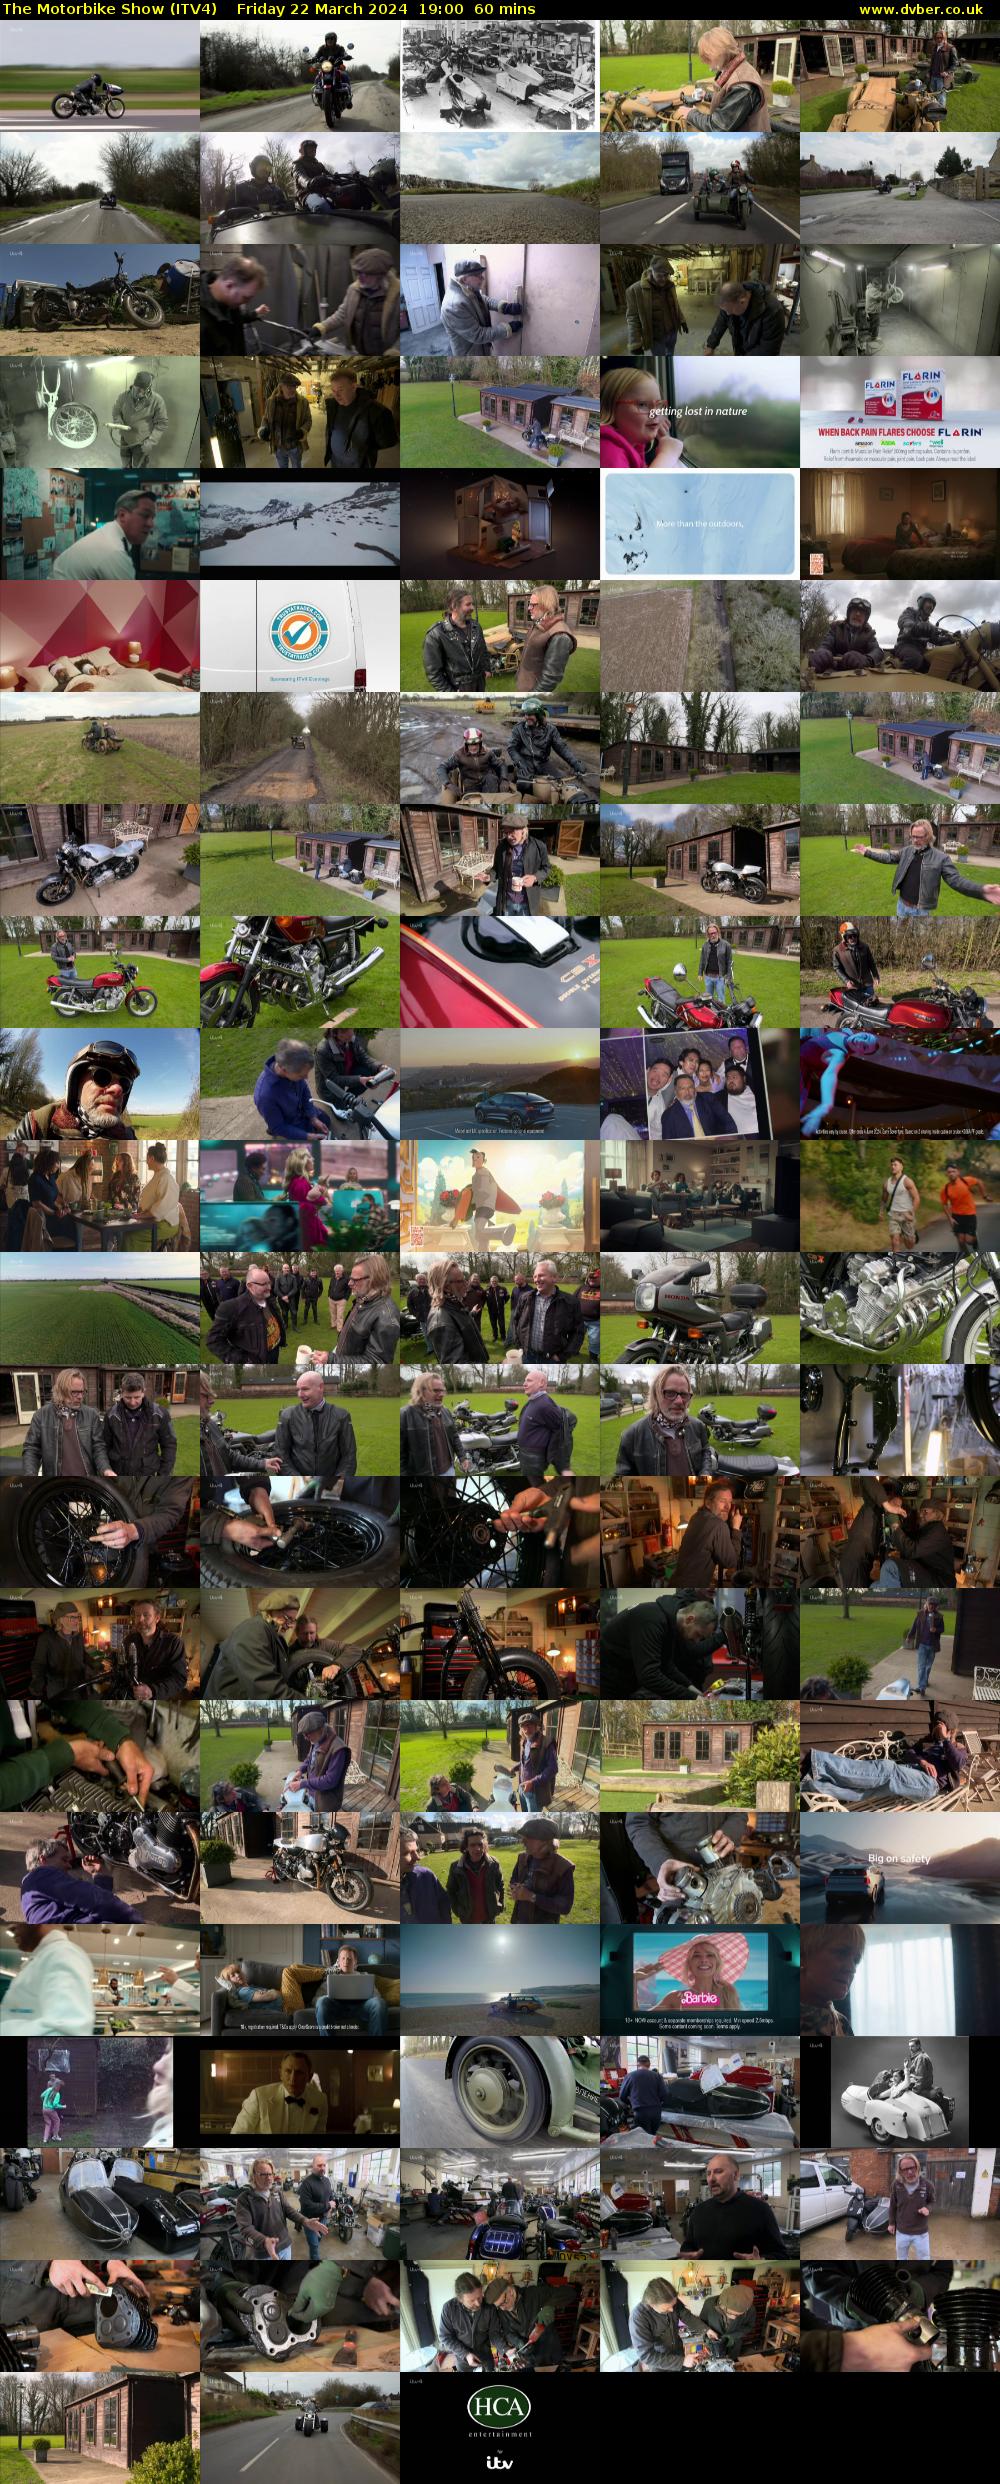 The Motorbike Show (ITV4) Friday 22 March 2024 19:00 - 20:00